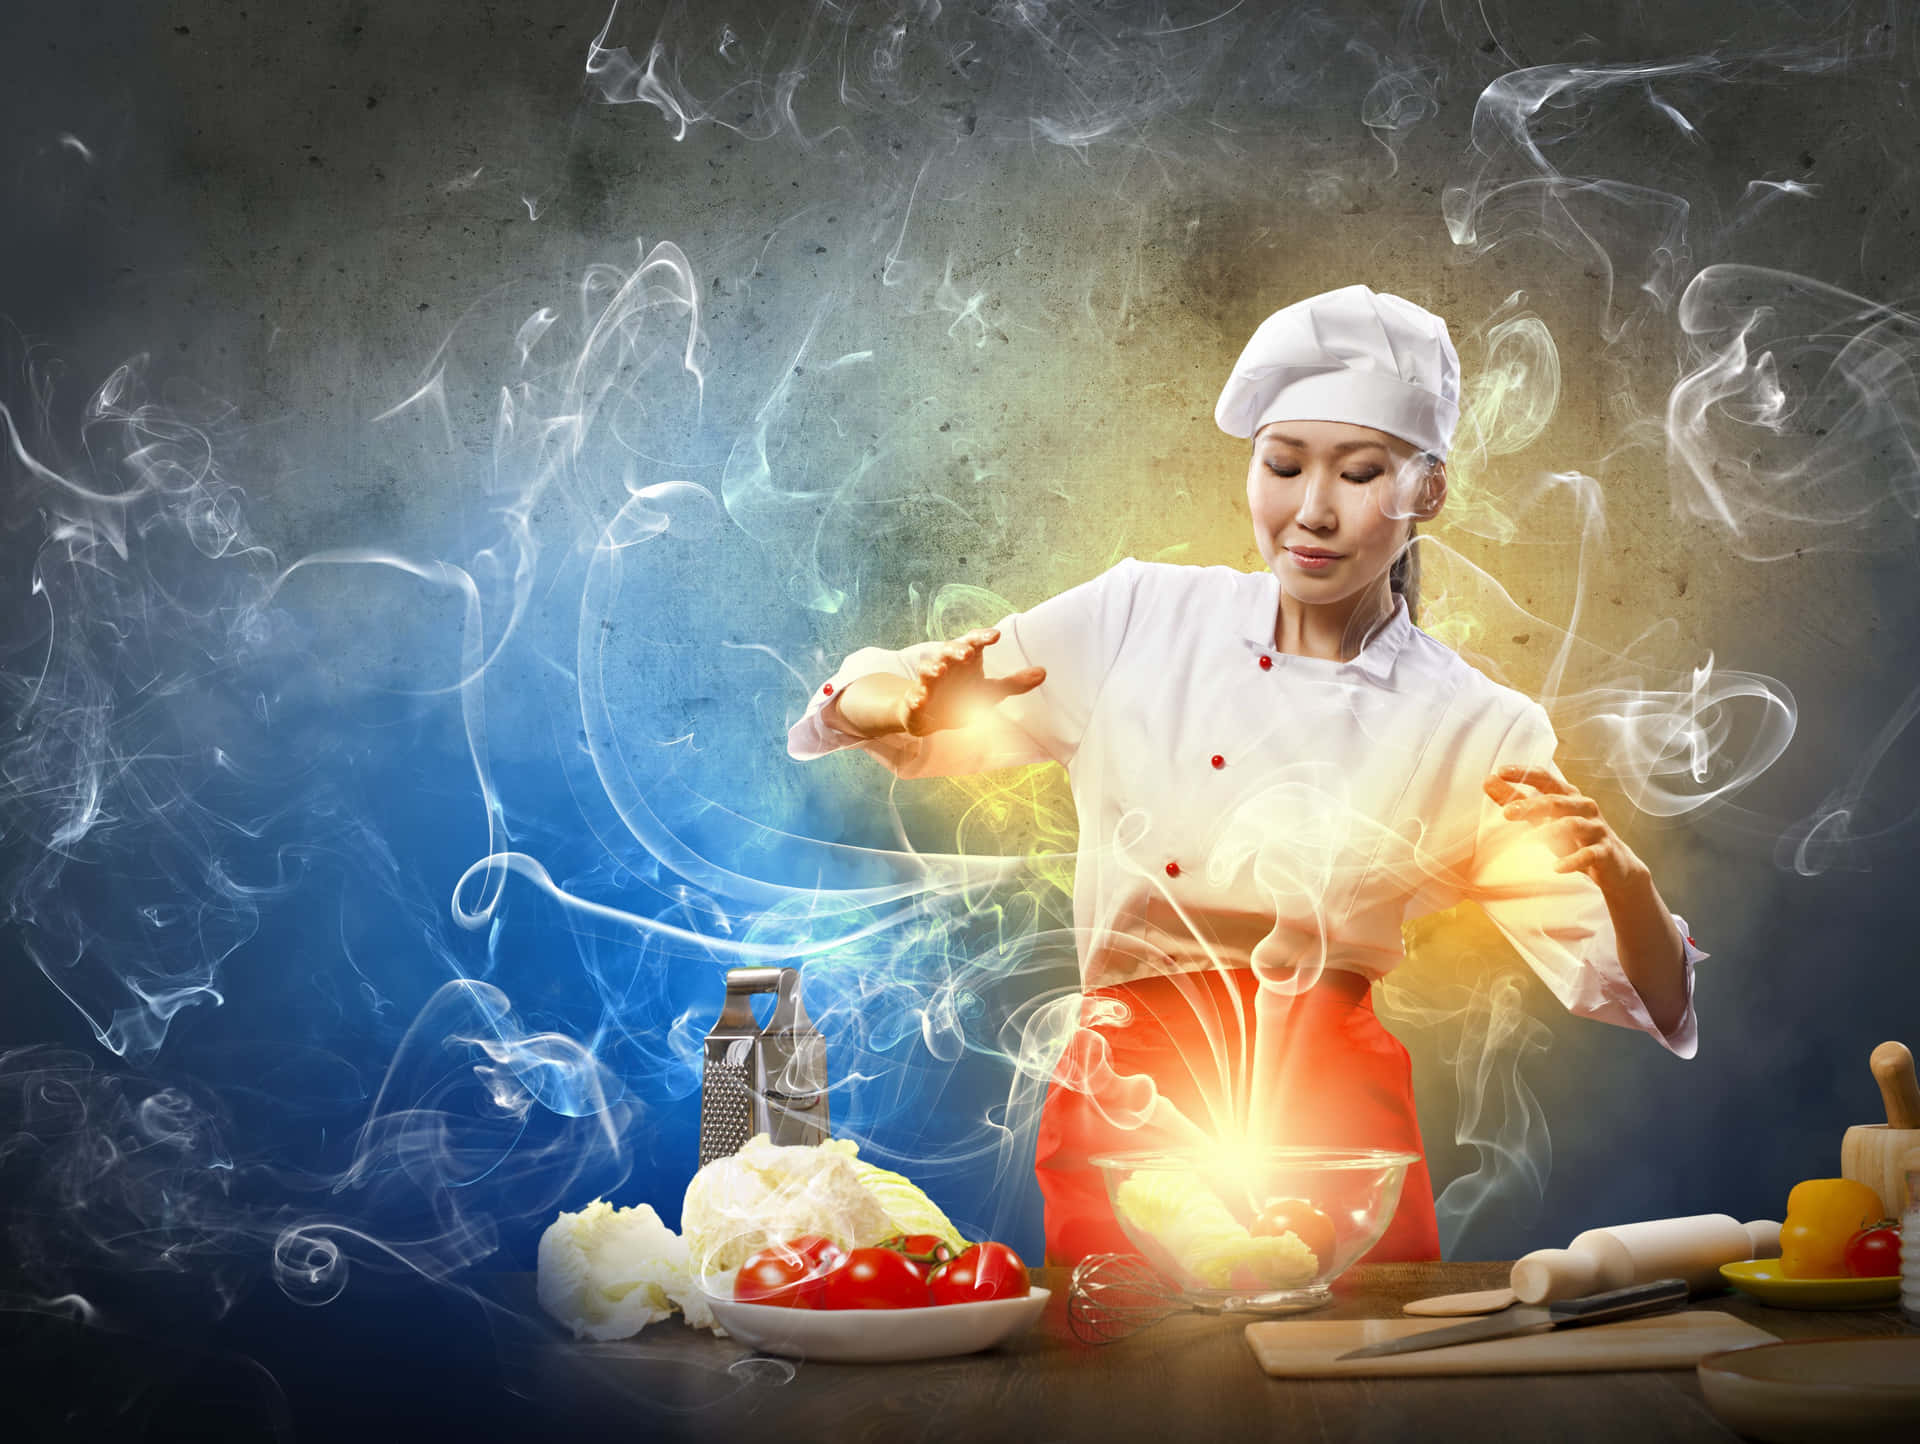 Be the chef you always wanted to be with the right ingredients